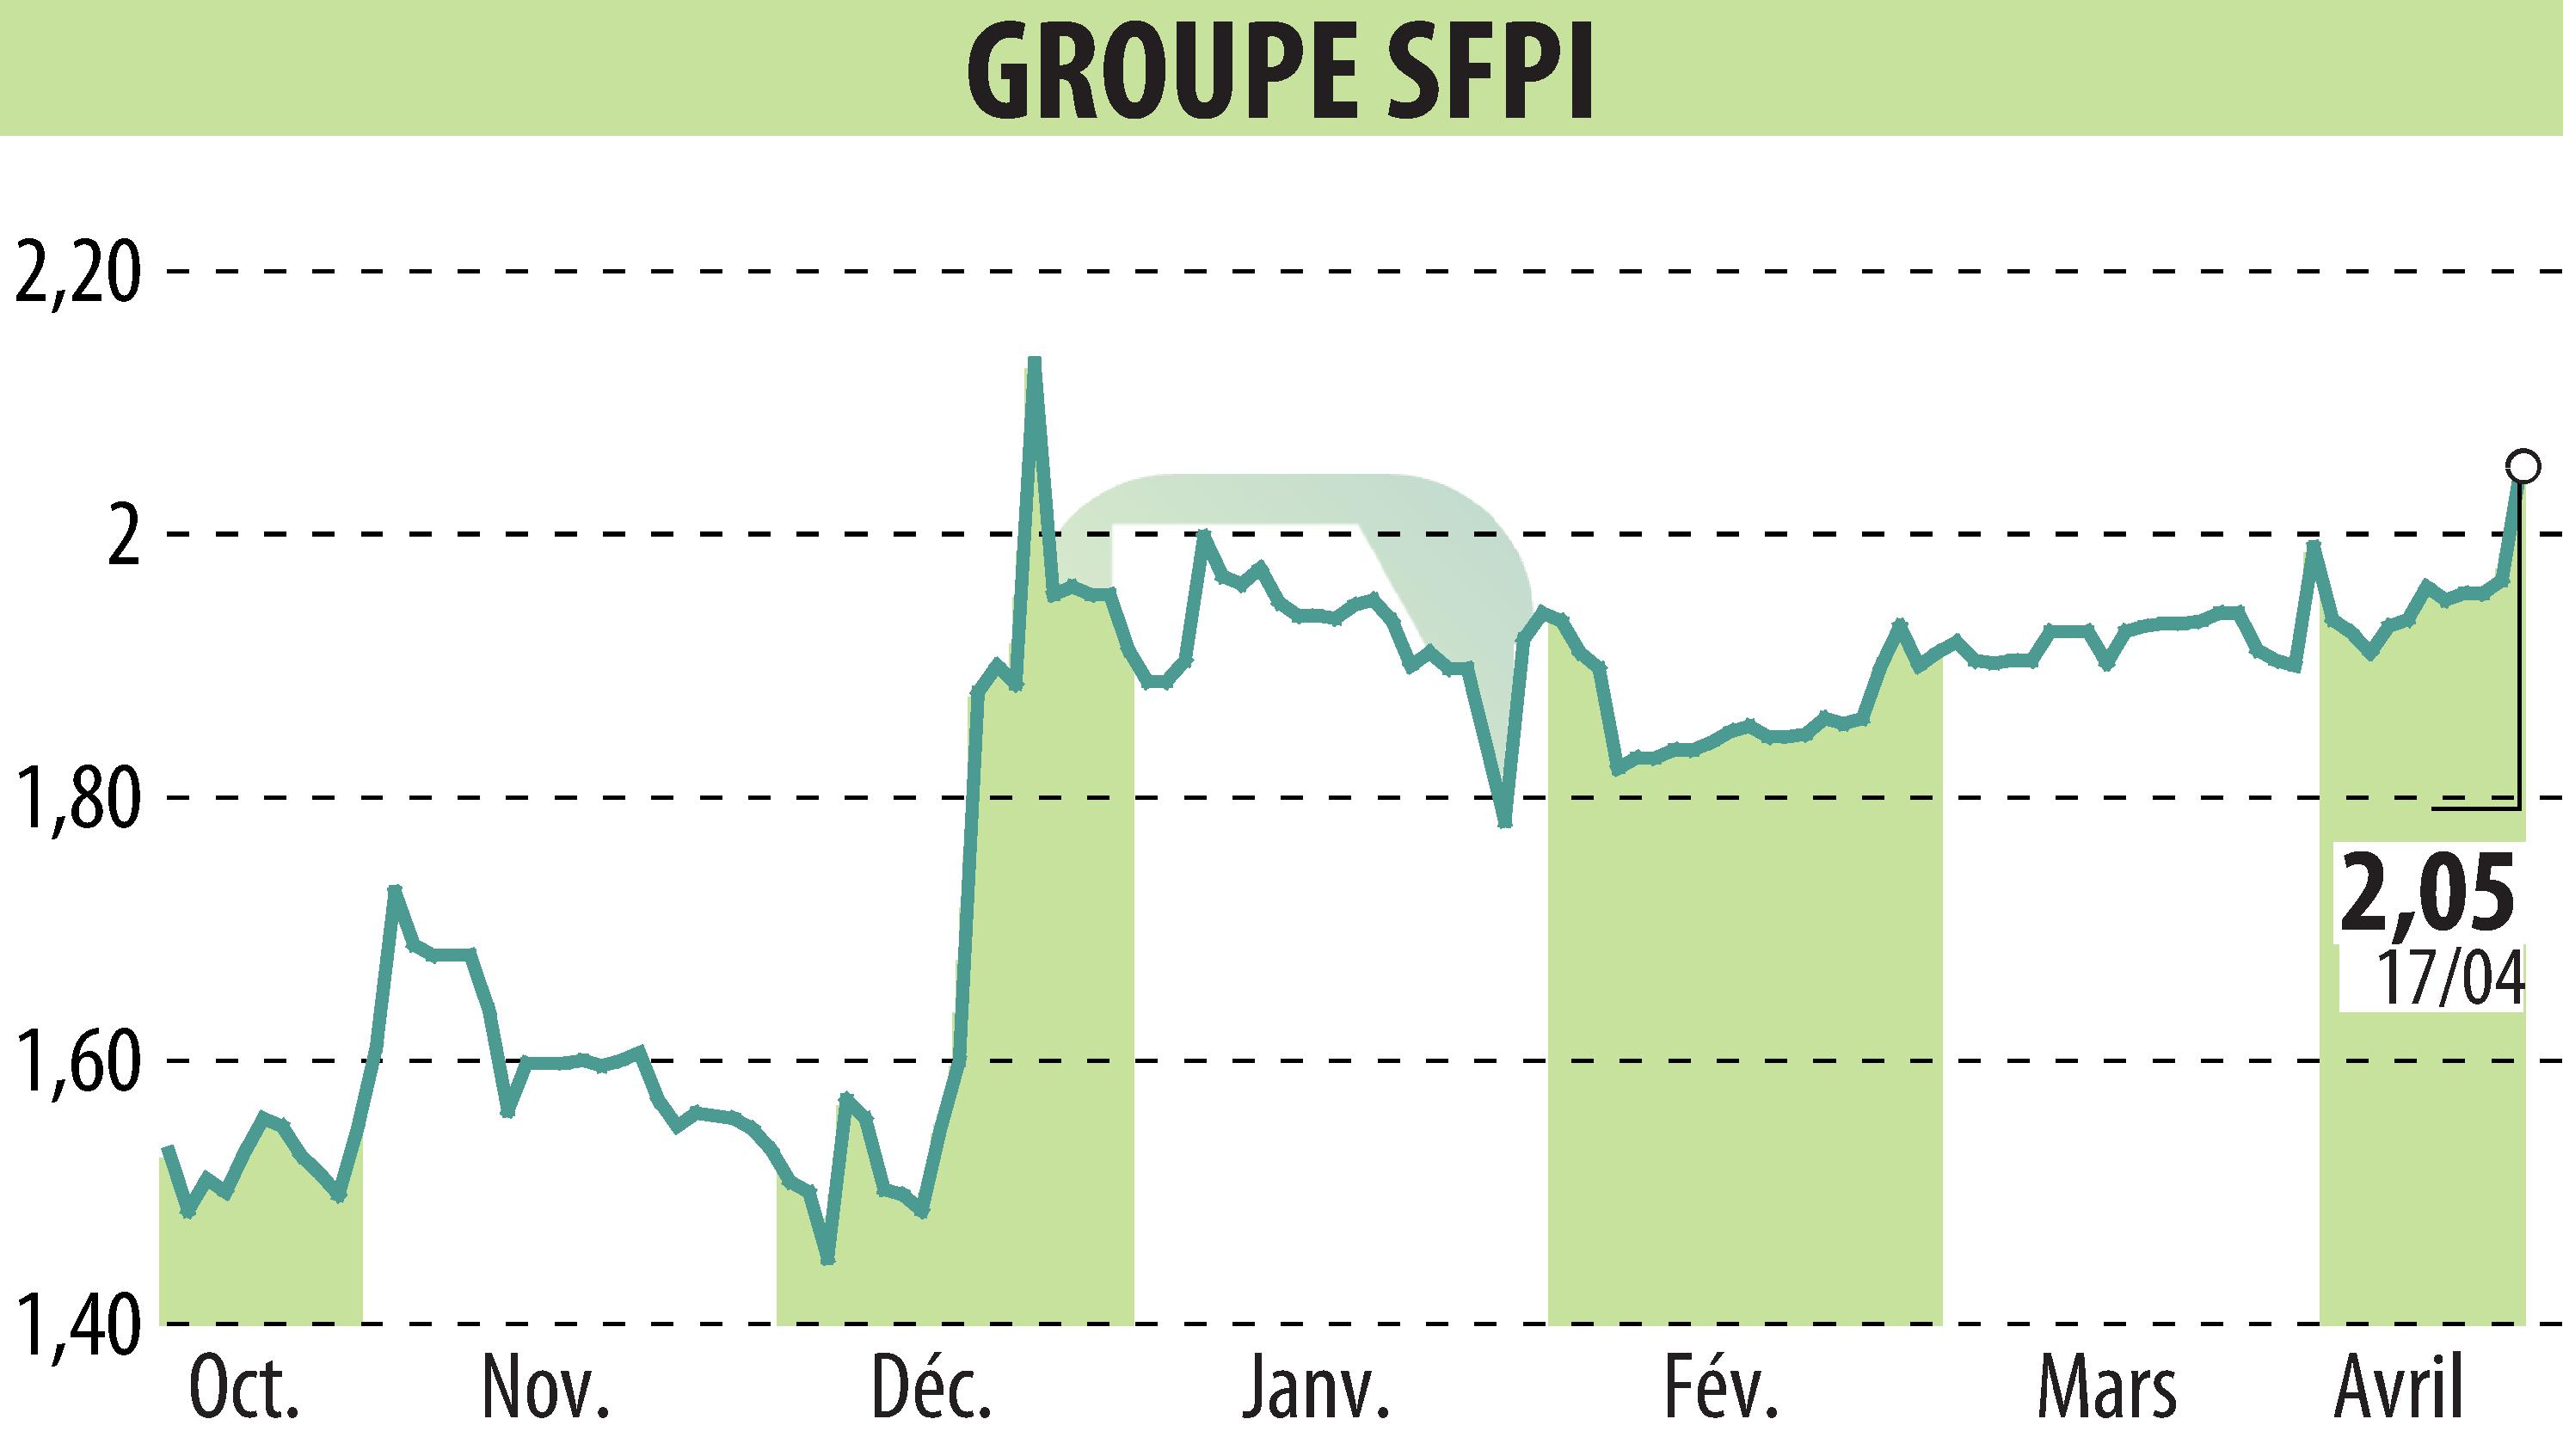 Stock price chart of GROUPE SFPI (EPA:SFPI) showing fluctuations.